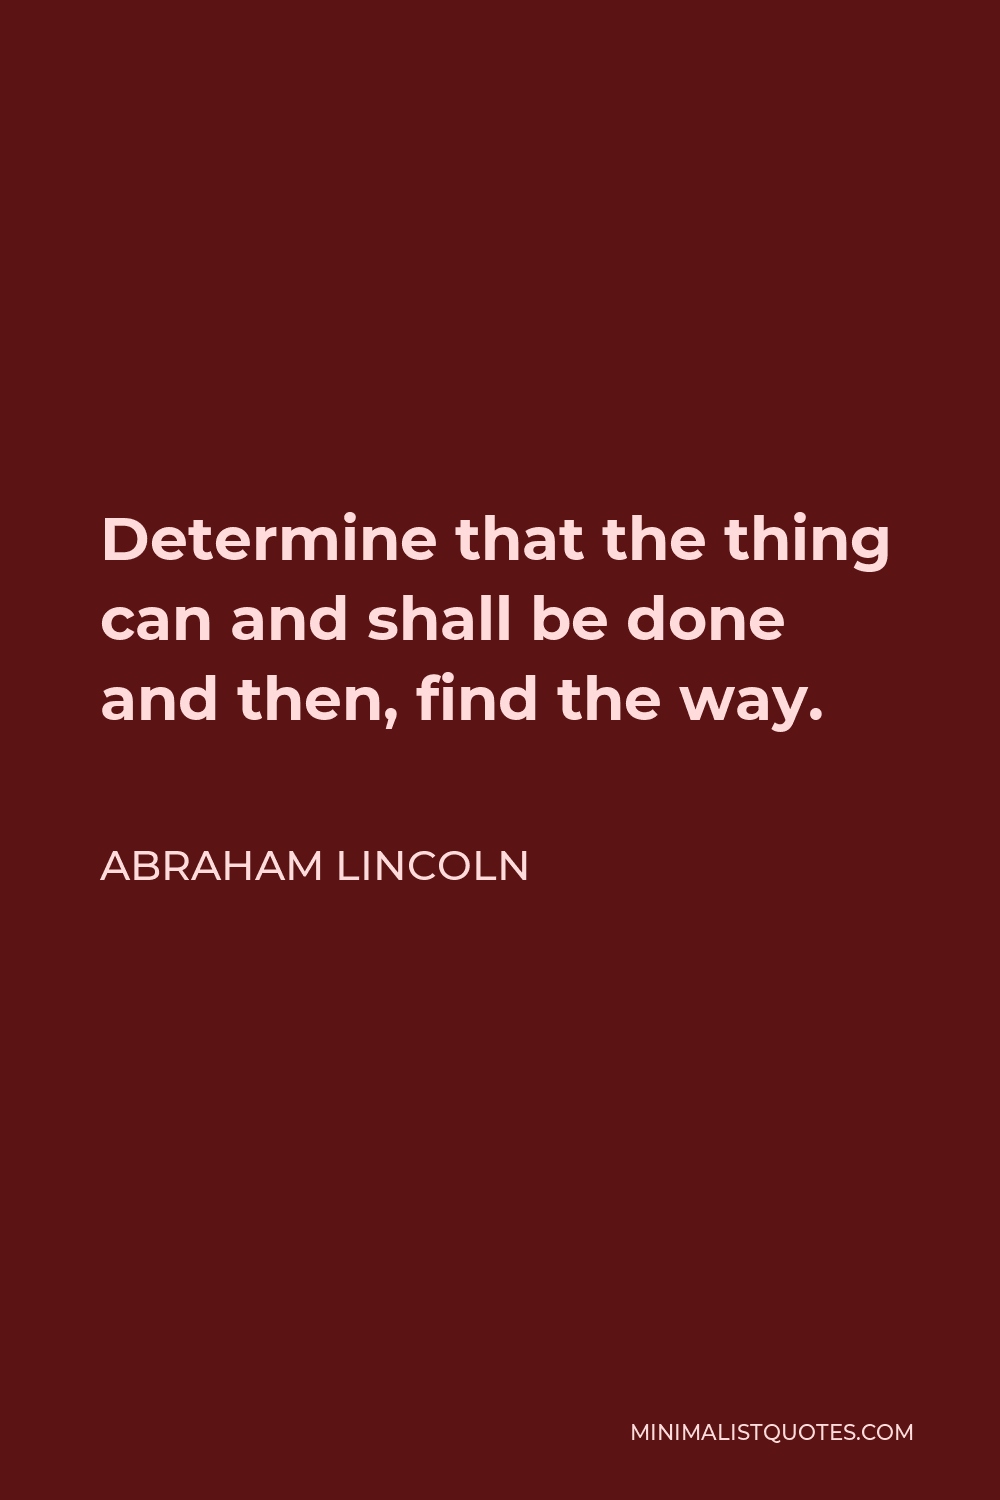 Abraham Lincoln Quote: Determine that the thing can and shall be done ...